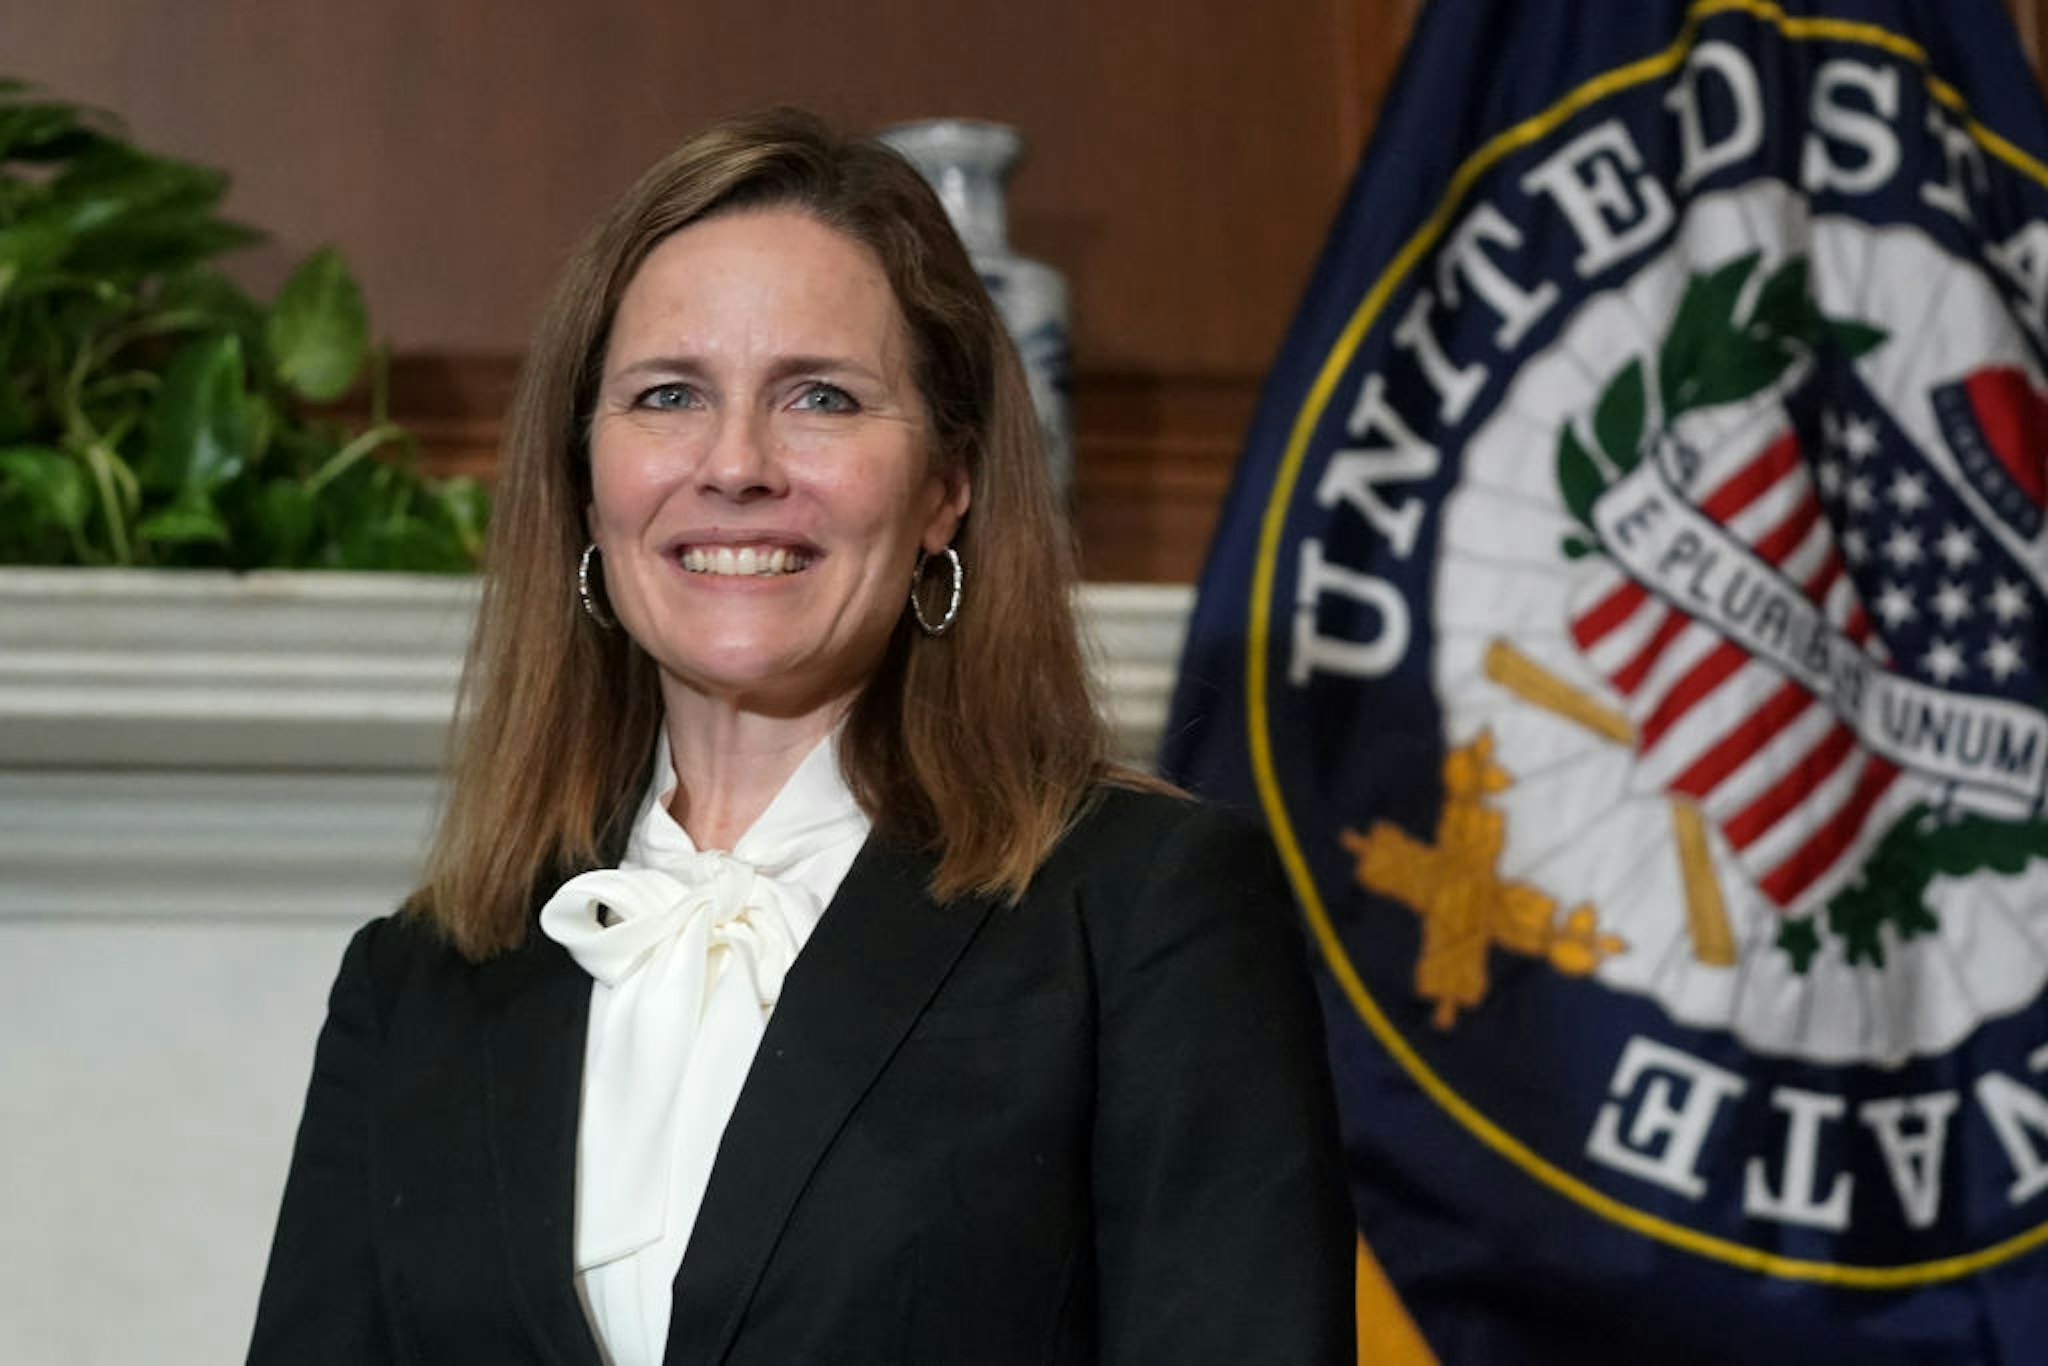 Seventh U.S. Circuit Court Judge Amy Coney Barrett, President Donald Trump's nominee for the U.S. Supreme Court, meets with Sen. Bill Cassidy (R-LA) as she prepares for her confirmation hearing, on Capitol Hill on October 1, 2020 in Washington, DC.